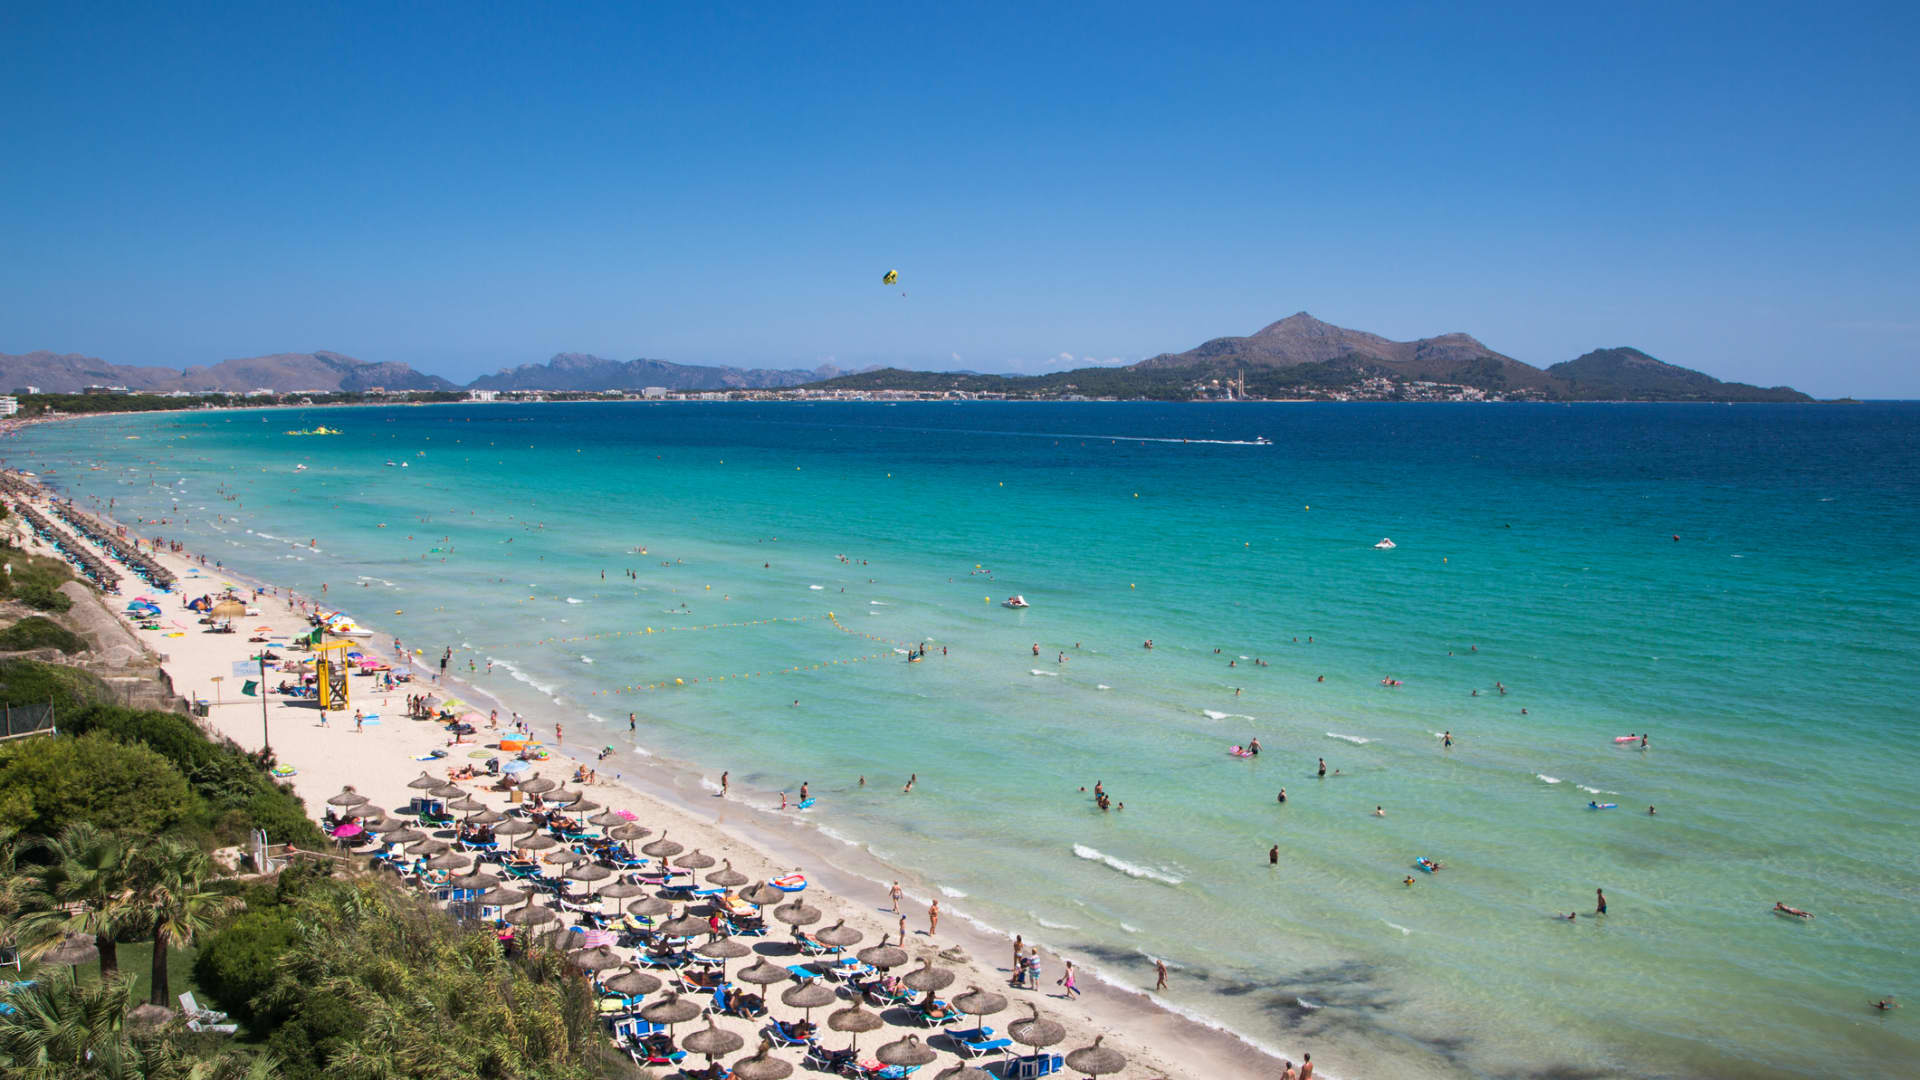 Playa de Muro near Port d'Alcudia has warm, shallow water and white sand.